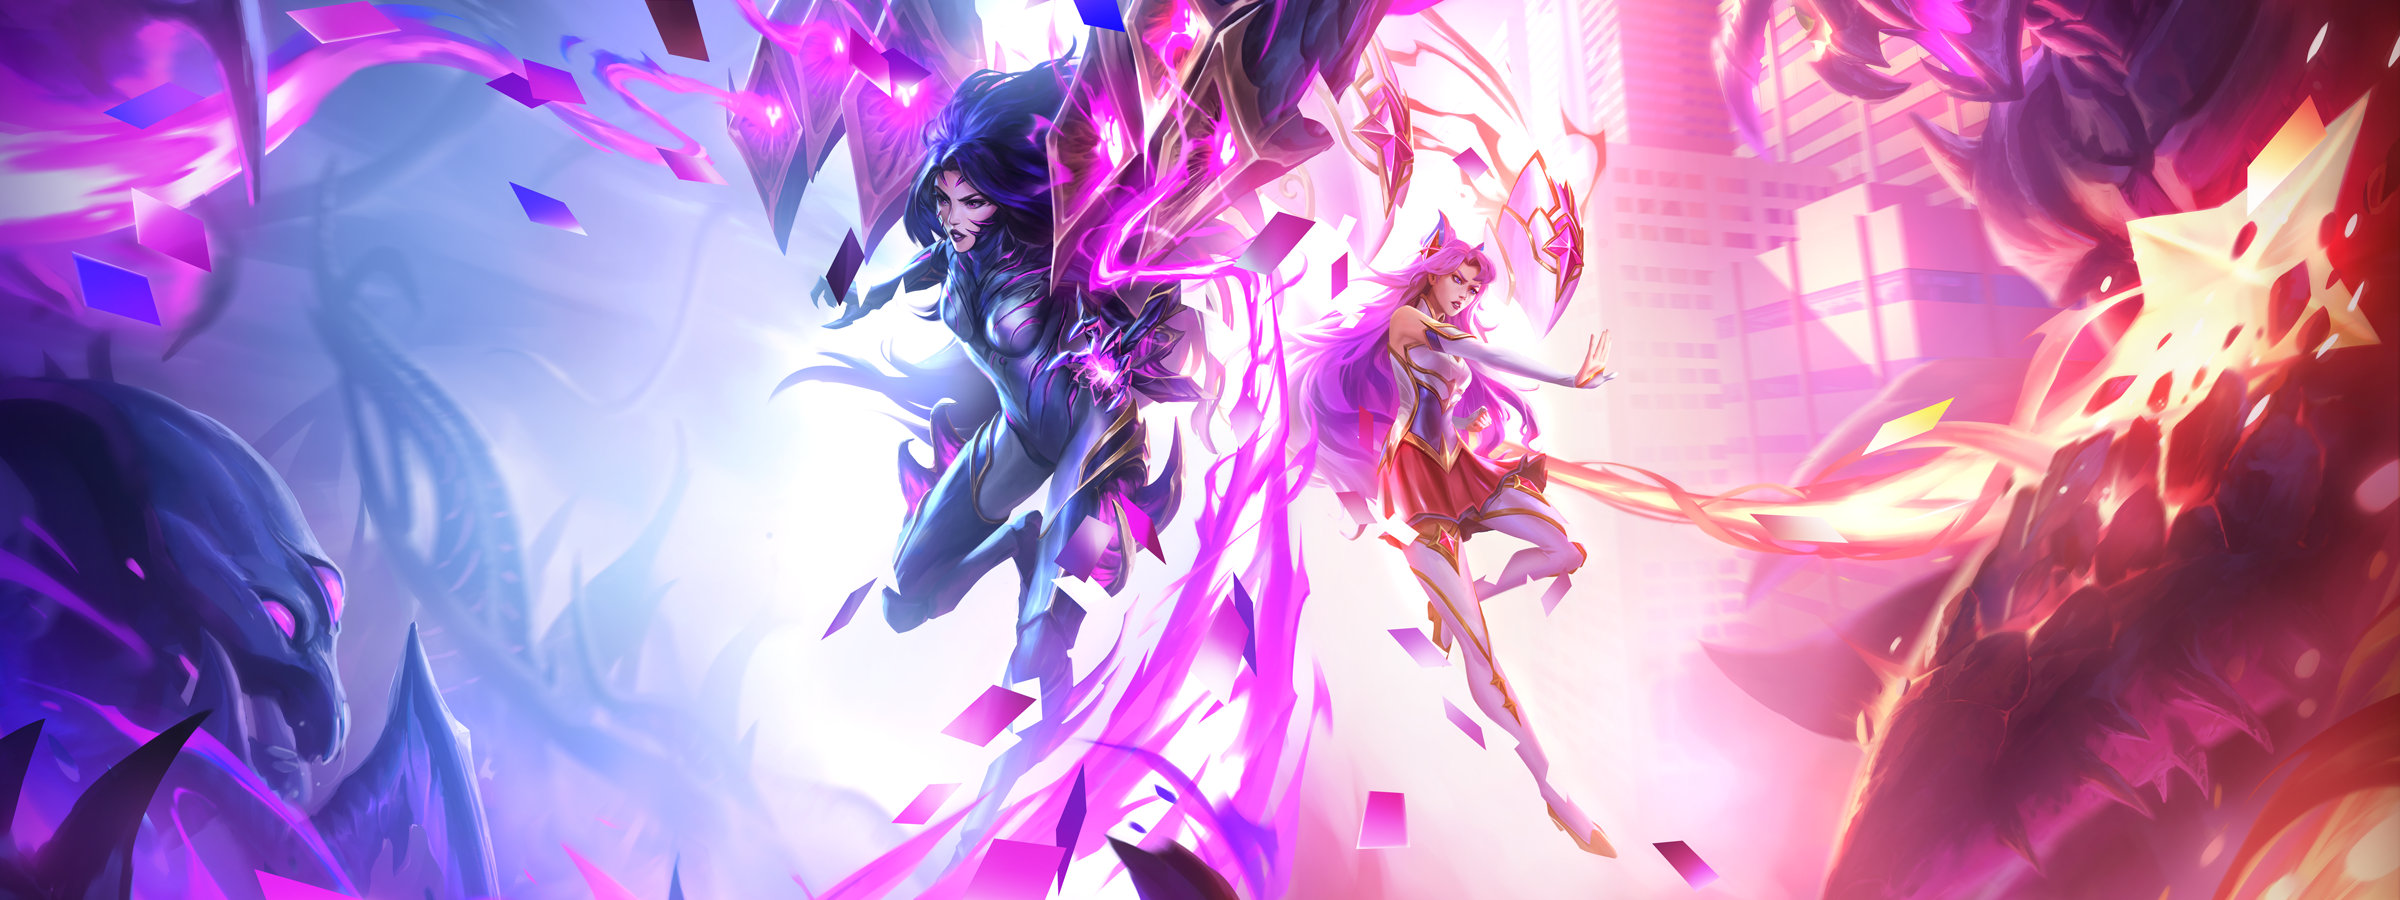 Anime 2400x900 League of Legends Star Guardian video games video game art video game characters